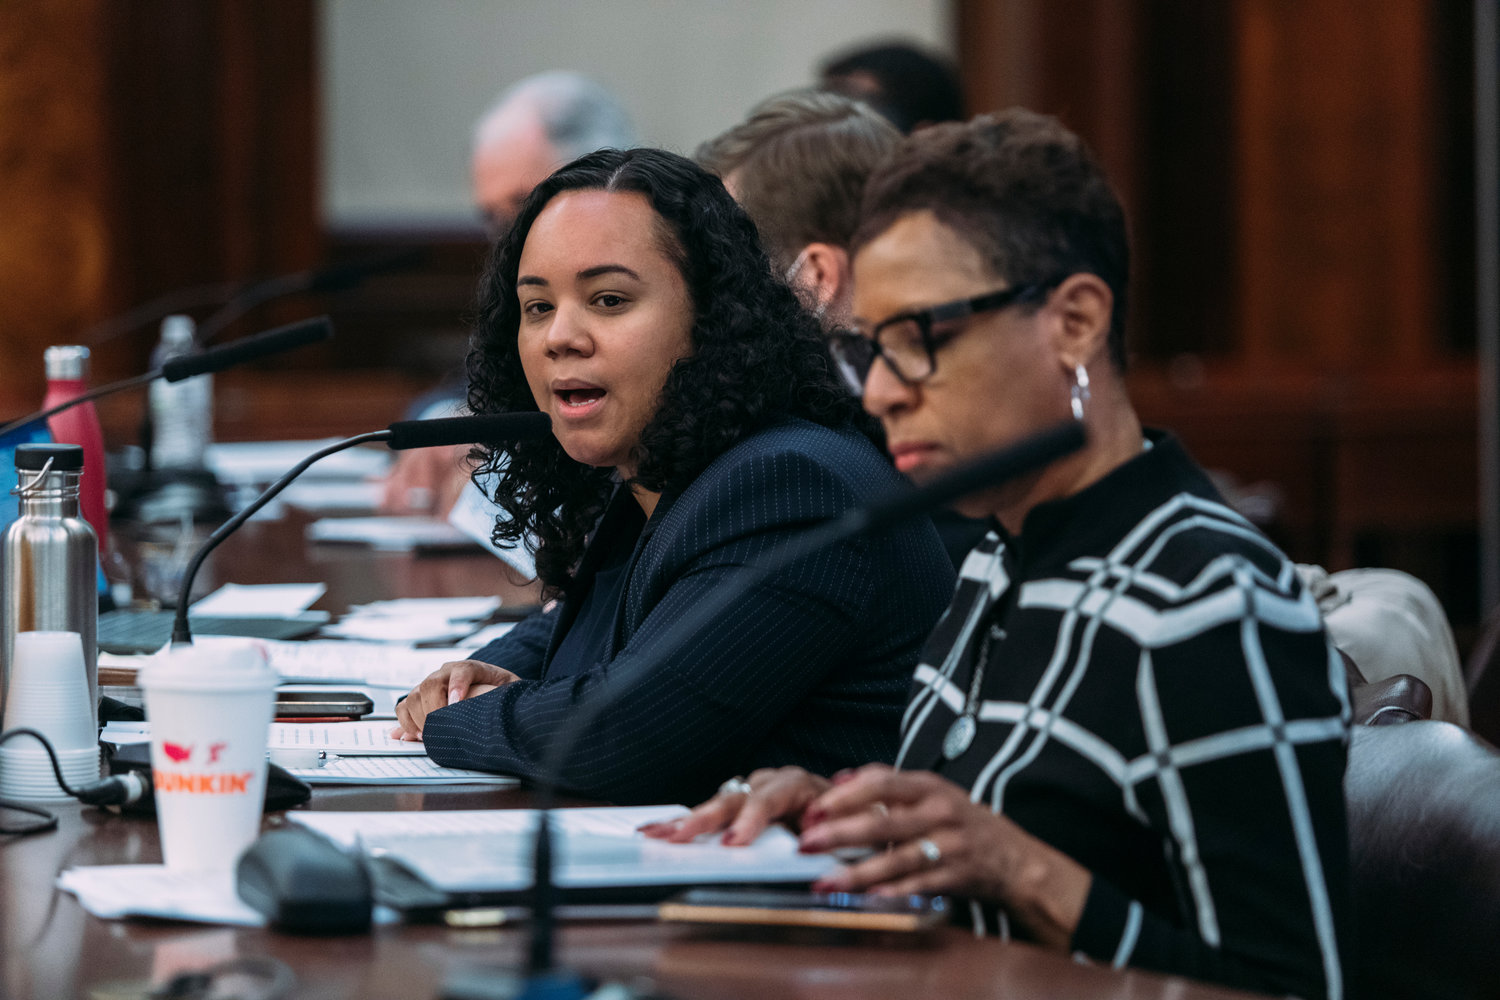 City Council Speaker Adrienne Adams, foreground, and Civil Service and Labor Committee chair Carmen De La Rosa during the committee’s Jan. 9 hearing. The committee took testimony on a proposed amendment to the city’s administrative code that would permit the city to charge municipal retirees for some health insurance. It declined to act and the legislation has been laid aside.